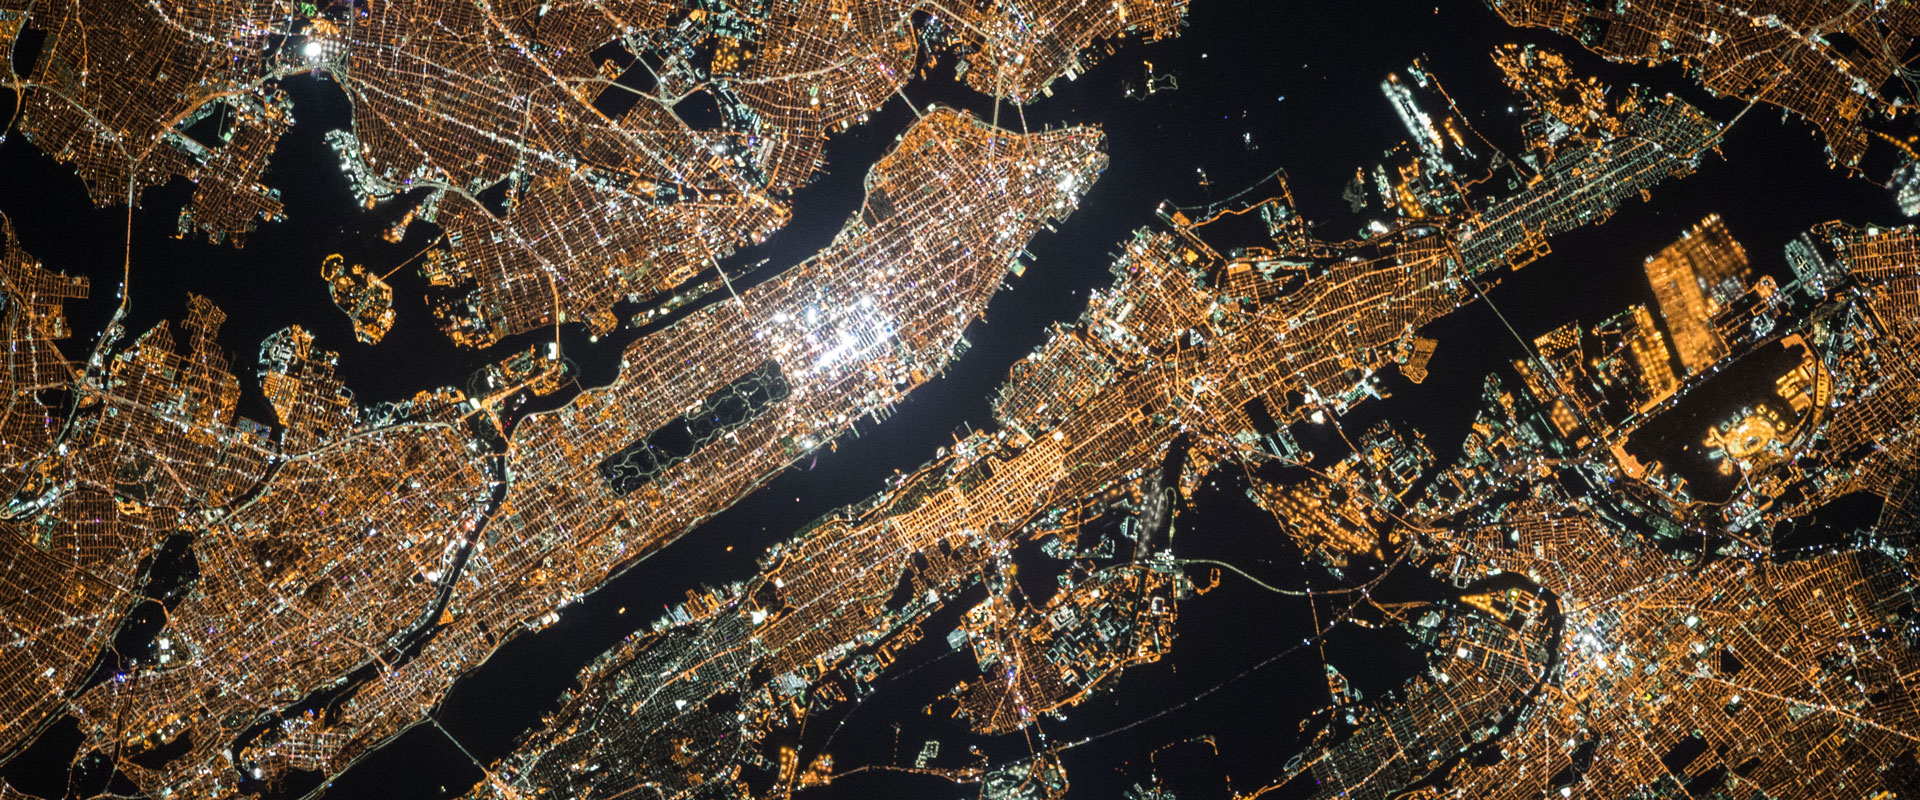 A satellite view of a city at night